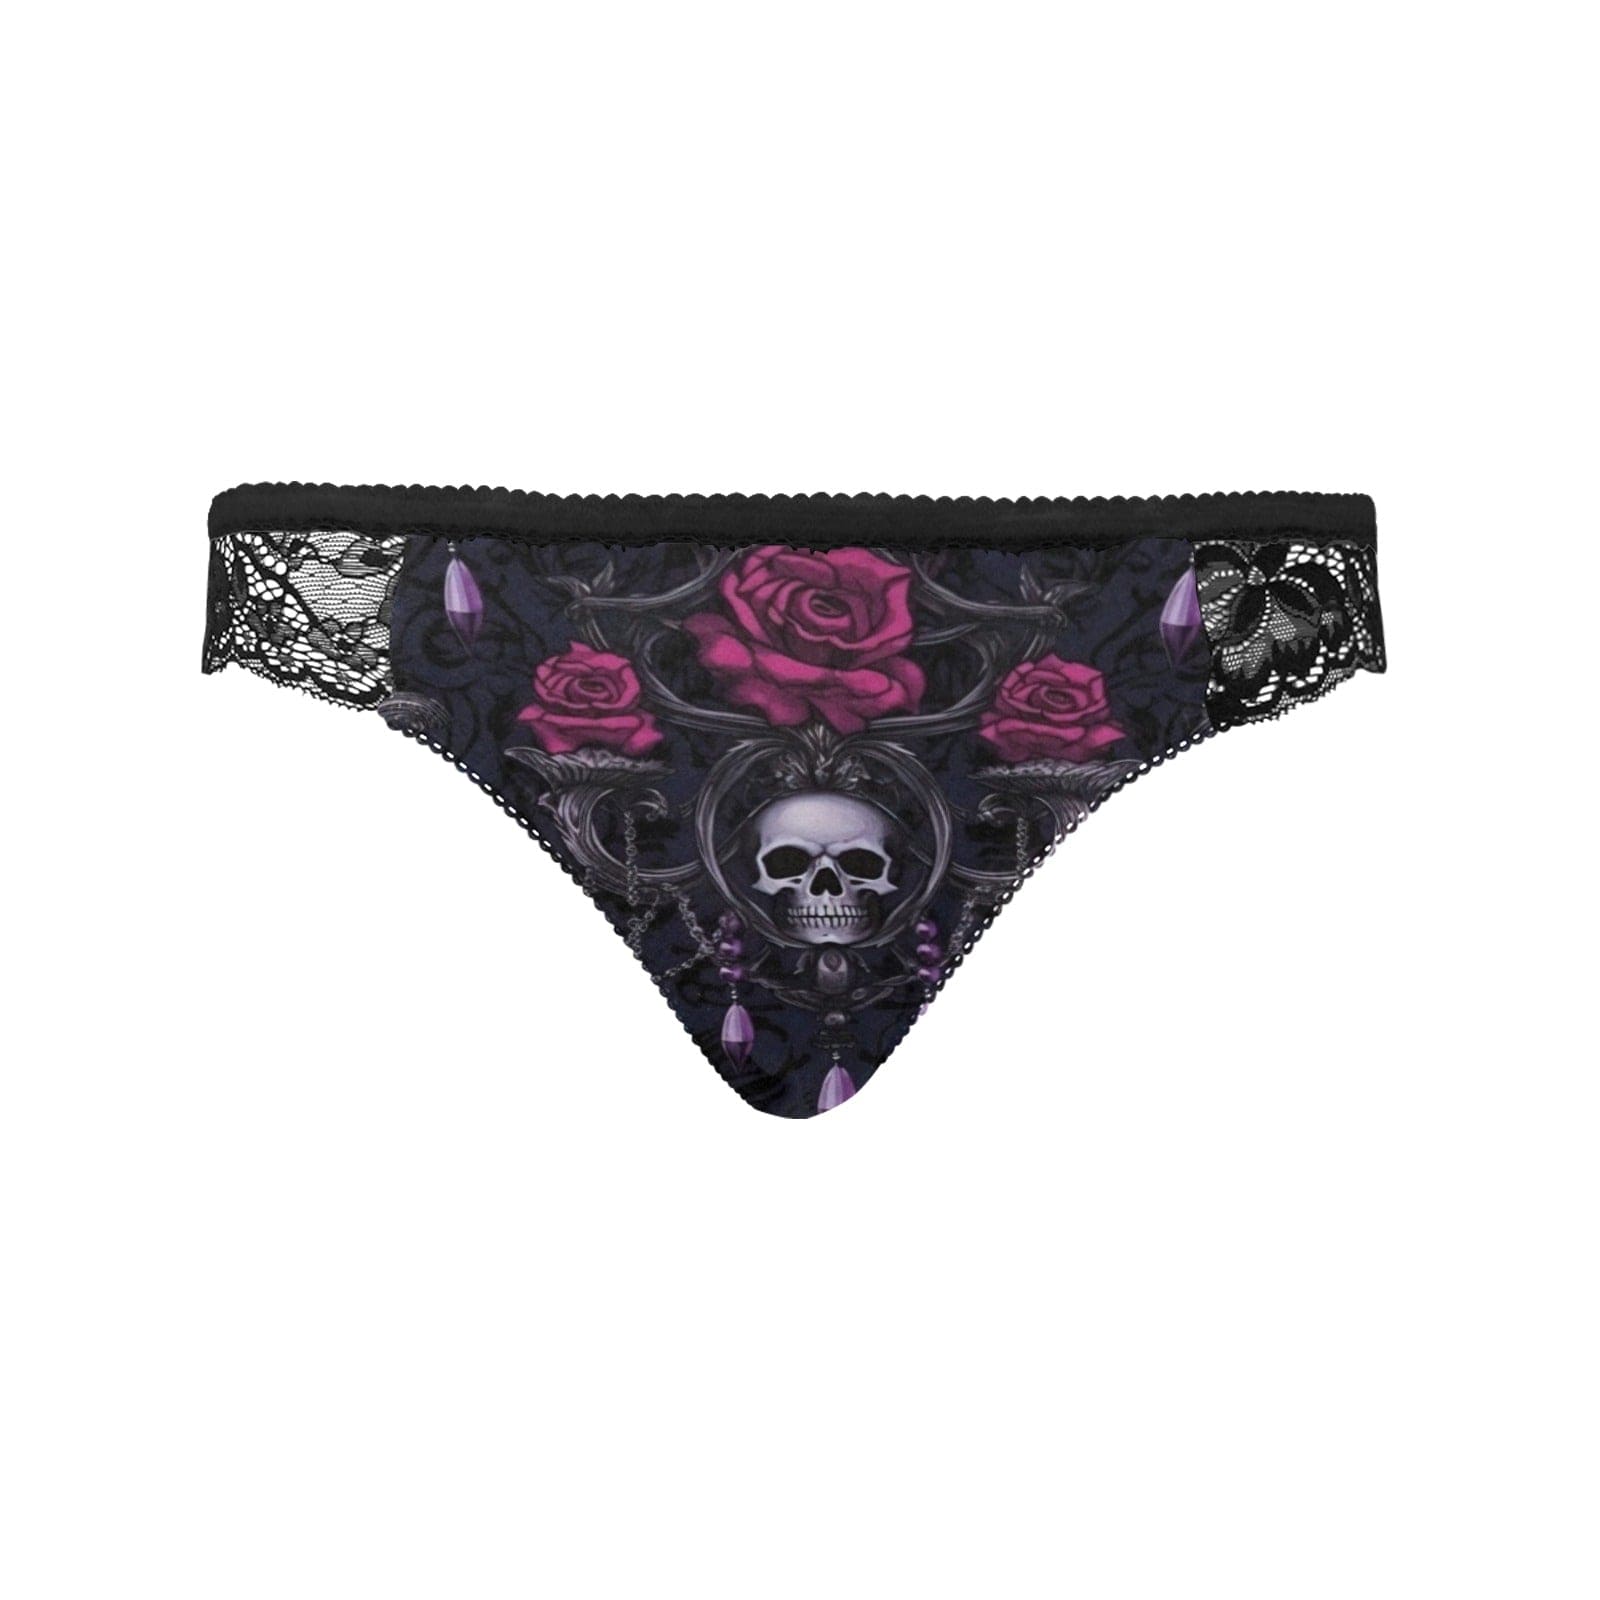 Gothic Panties with Skull Pattern Stock Image - Image of accessory,  macabre: 114735503